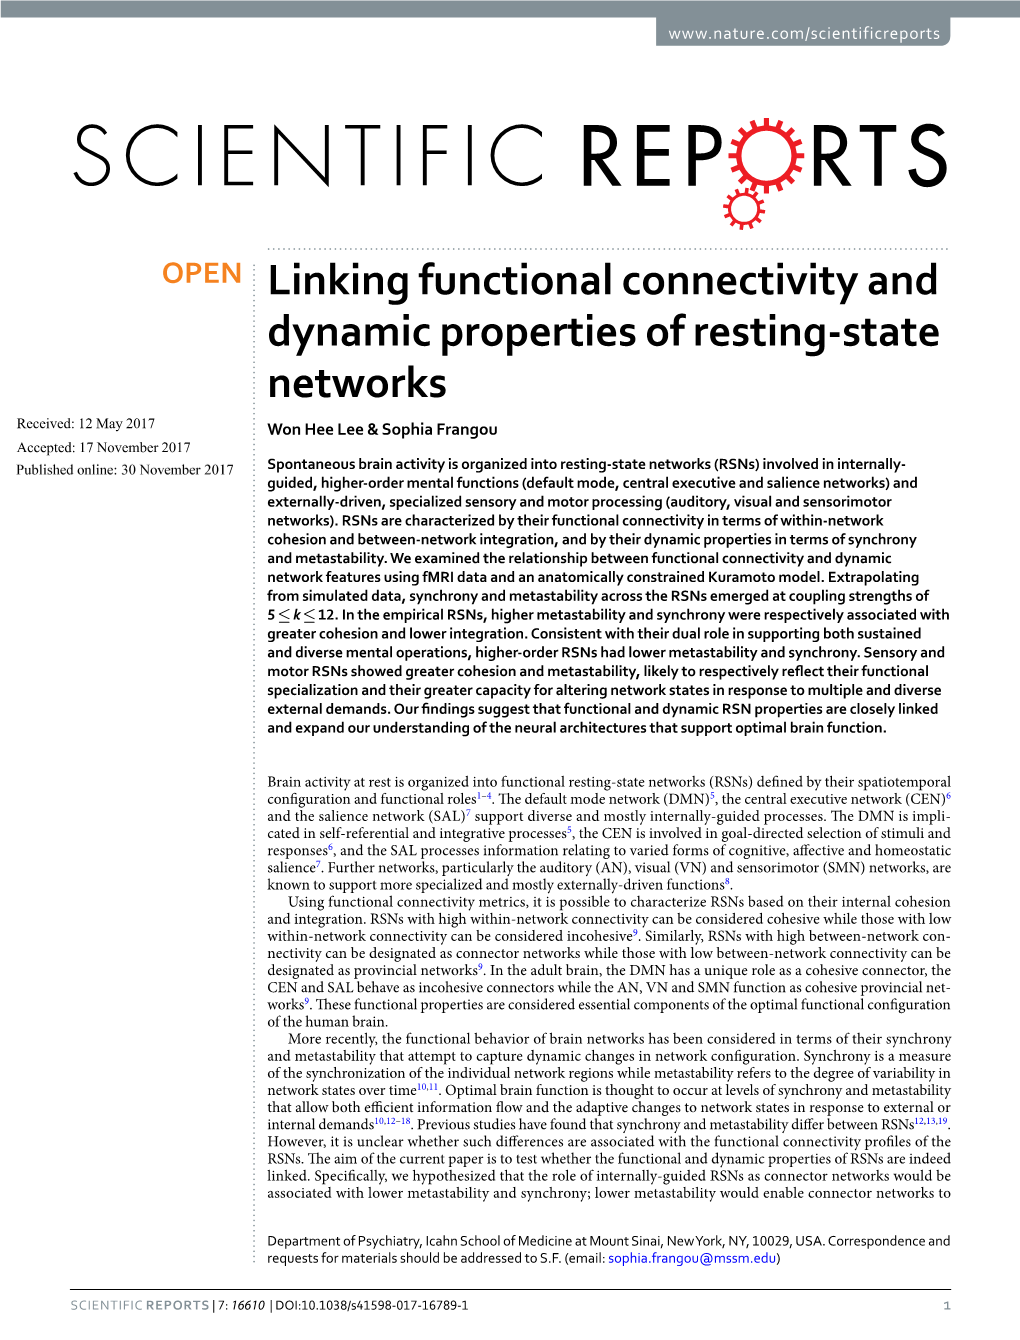 Linking Functional Connectivity and Dynamic Properties of Resting-State Networks